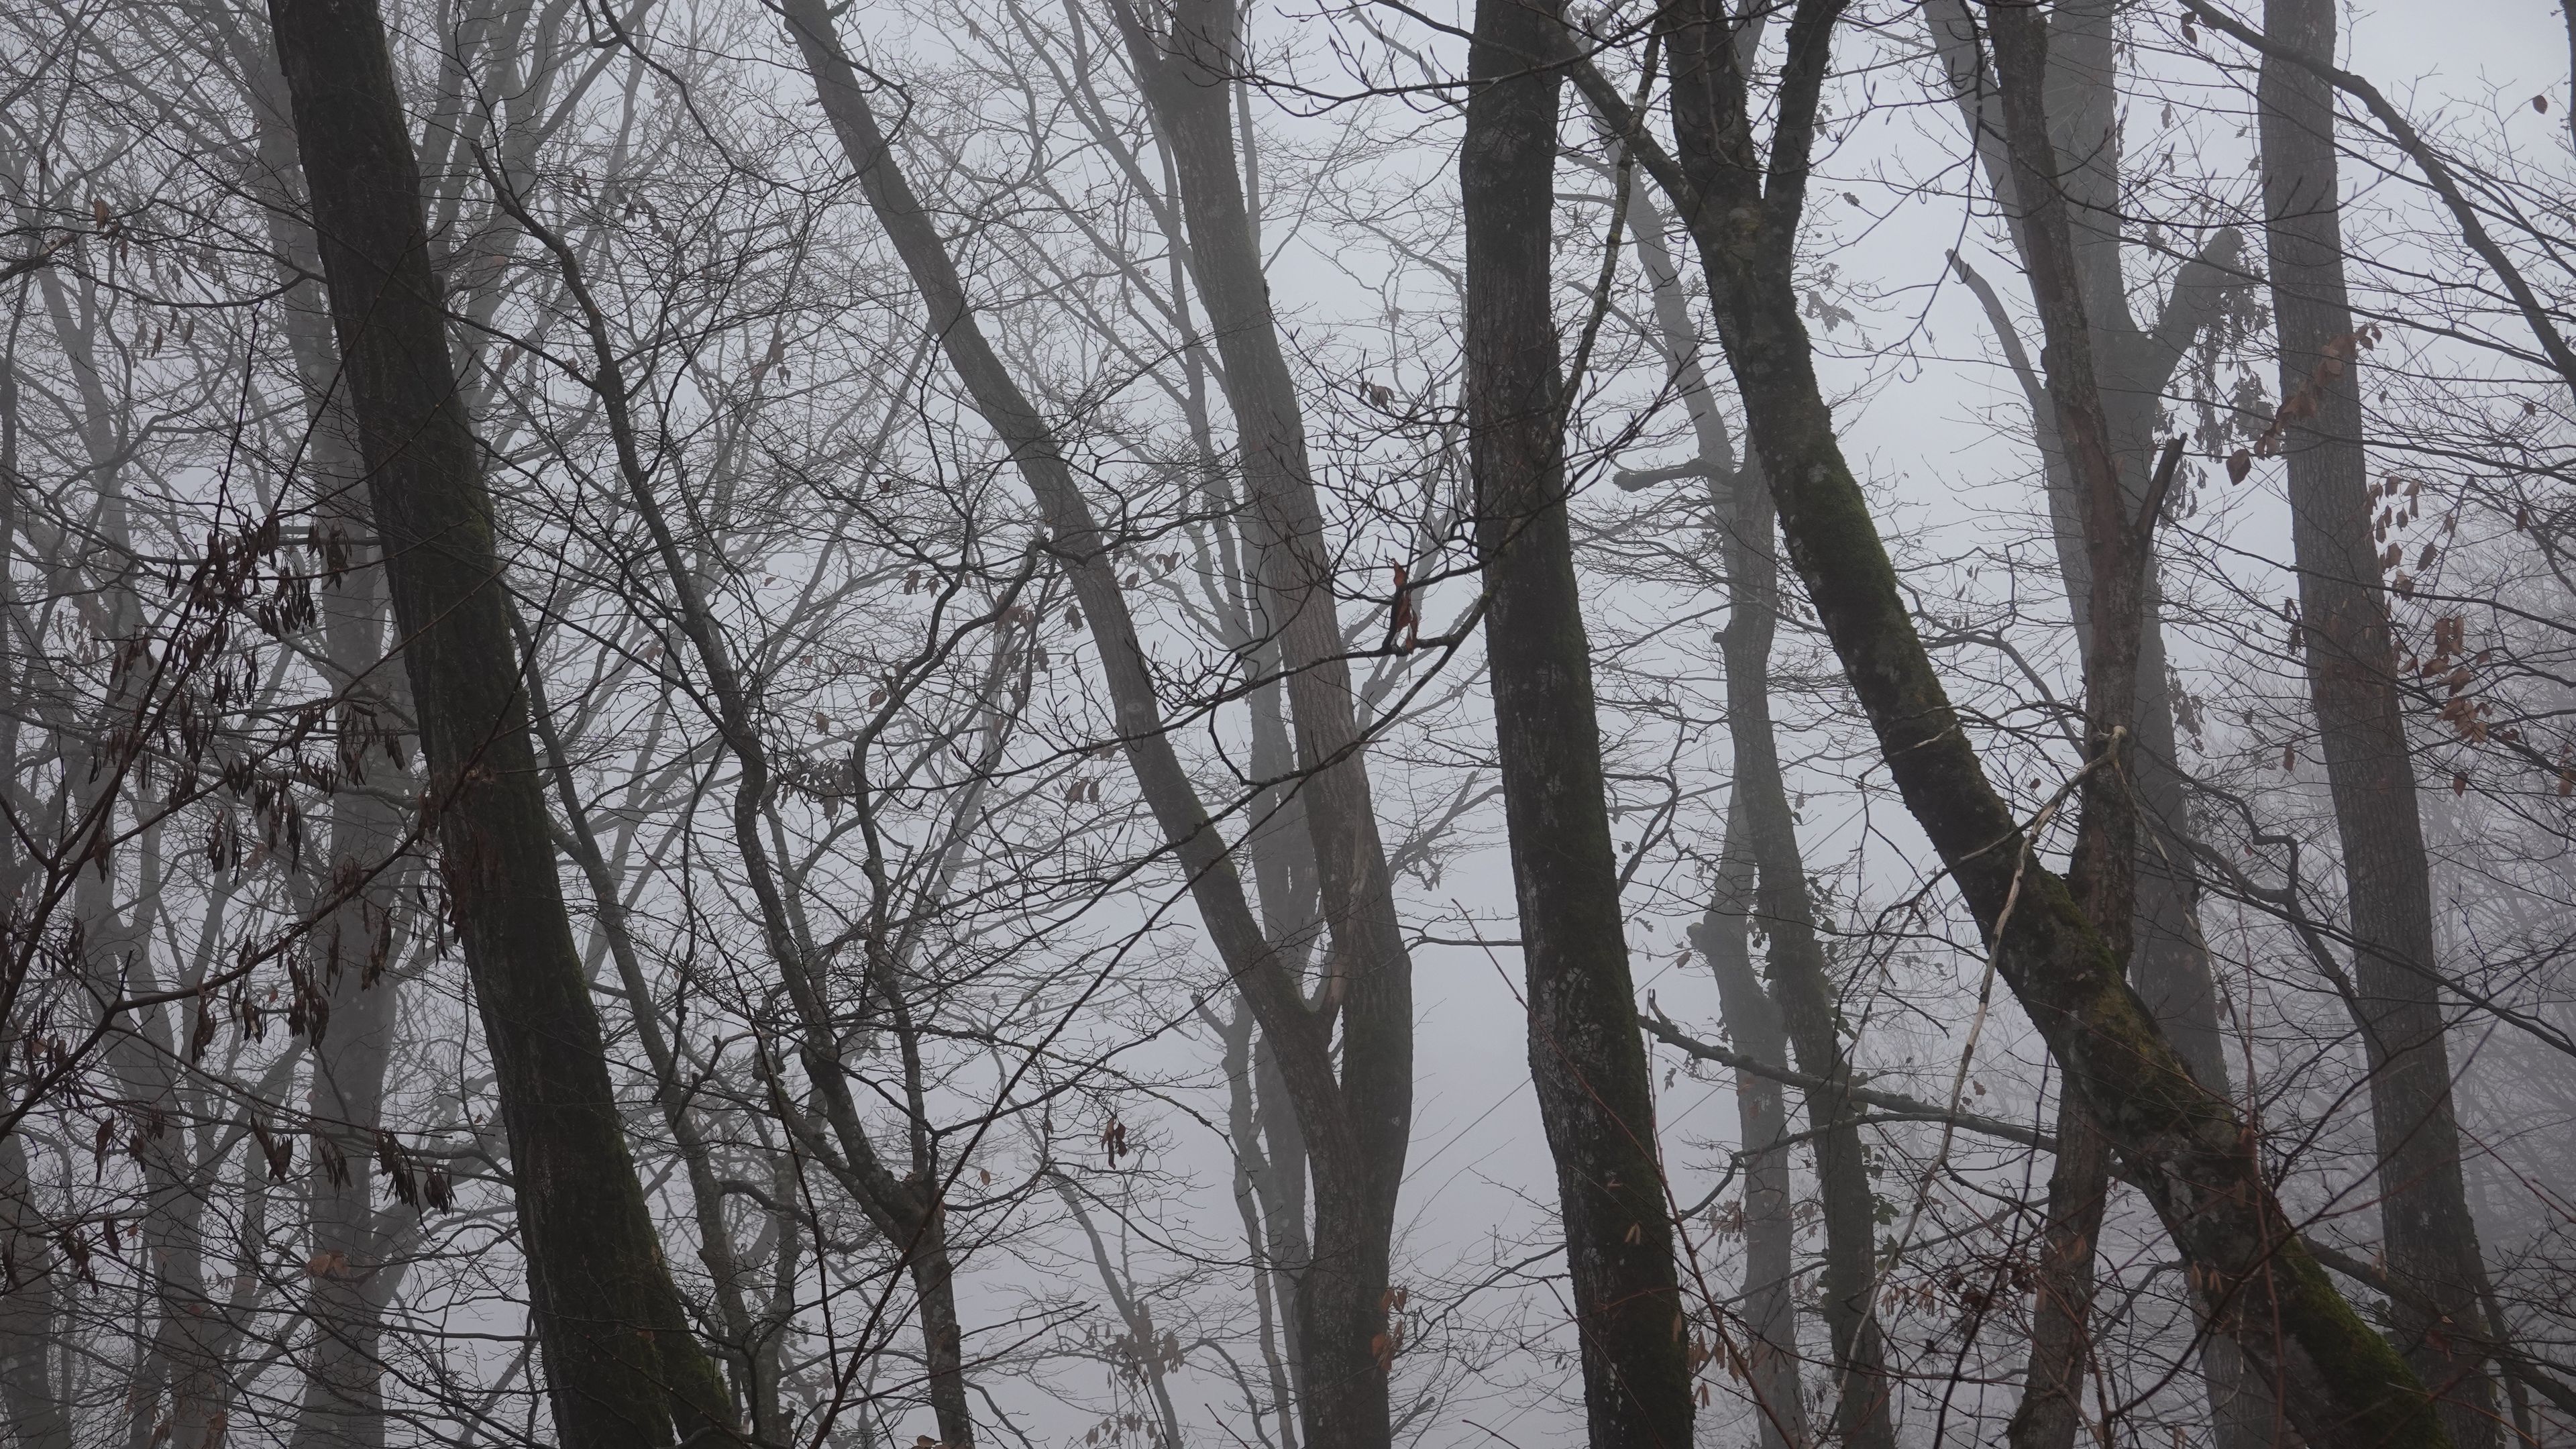 Download wallpaper 3840x2160 trees, fog, branches, leaves 4k uhd 16:9